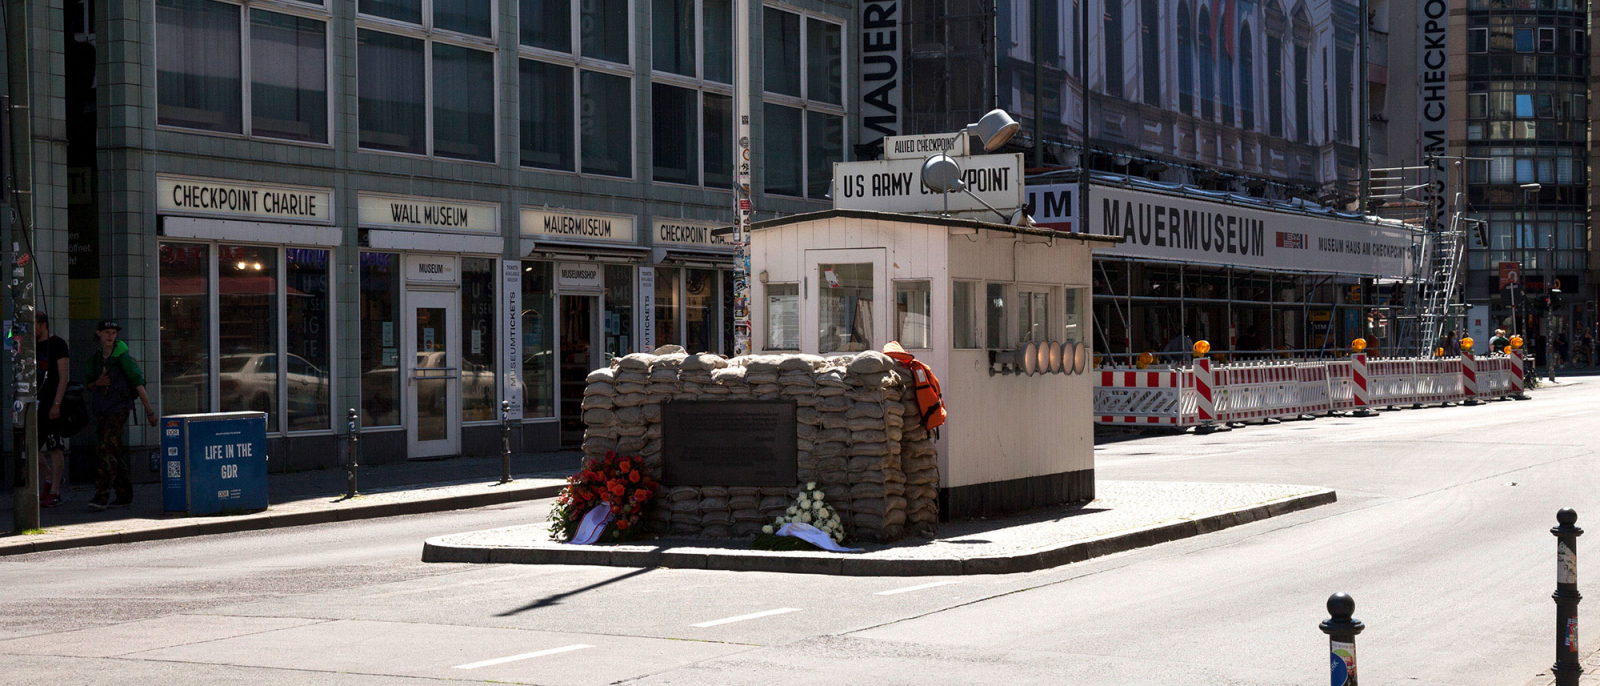 The Allied control booth on Friedrichstrasse, rebuilt in 2001, with a pile of sandbags and two bouquets of flowers in front of it.